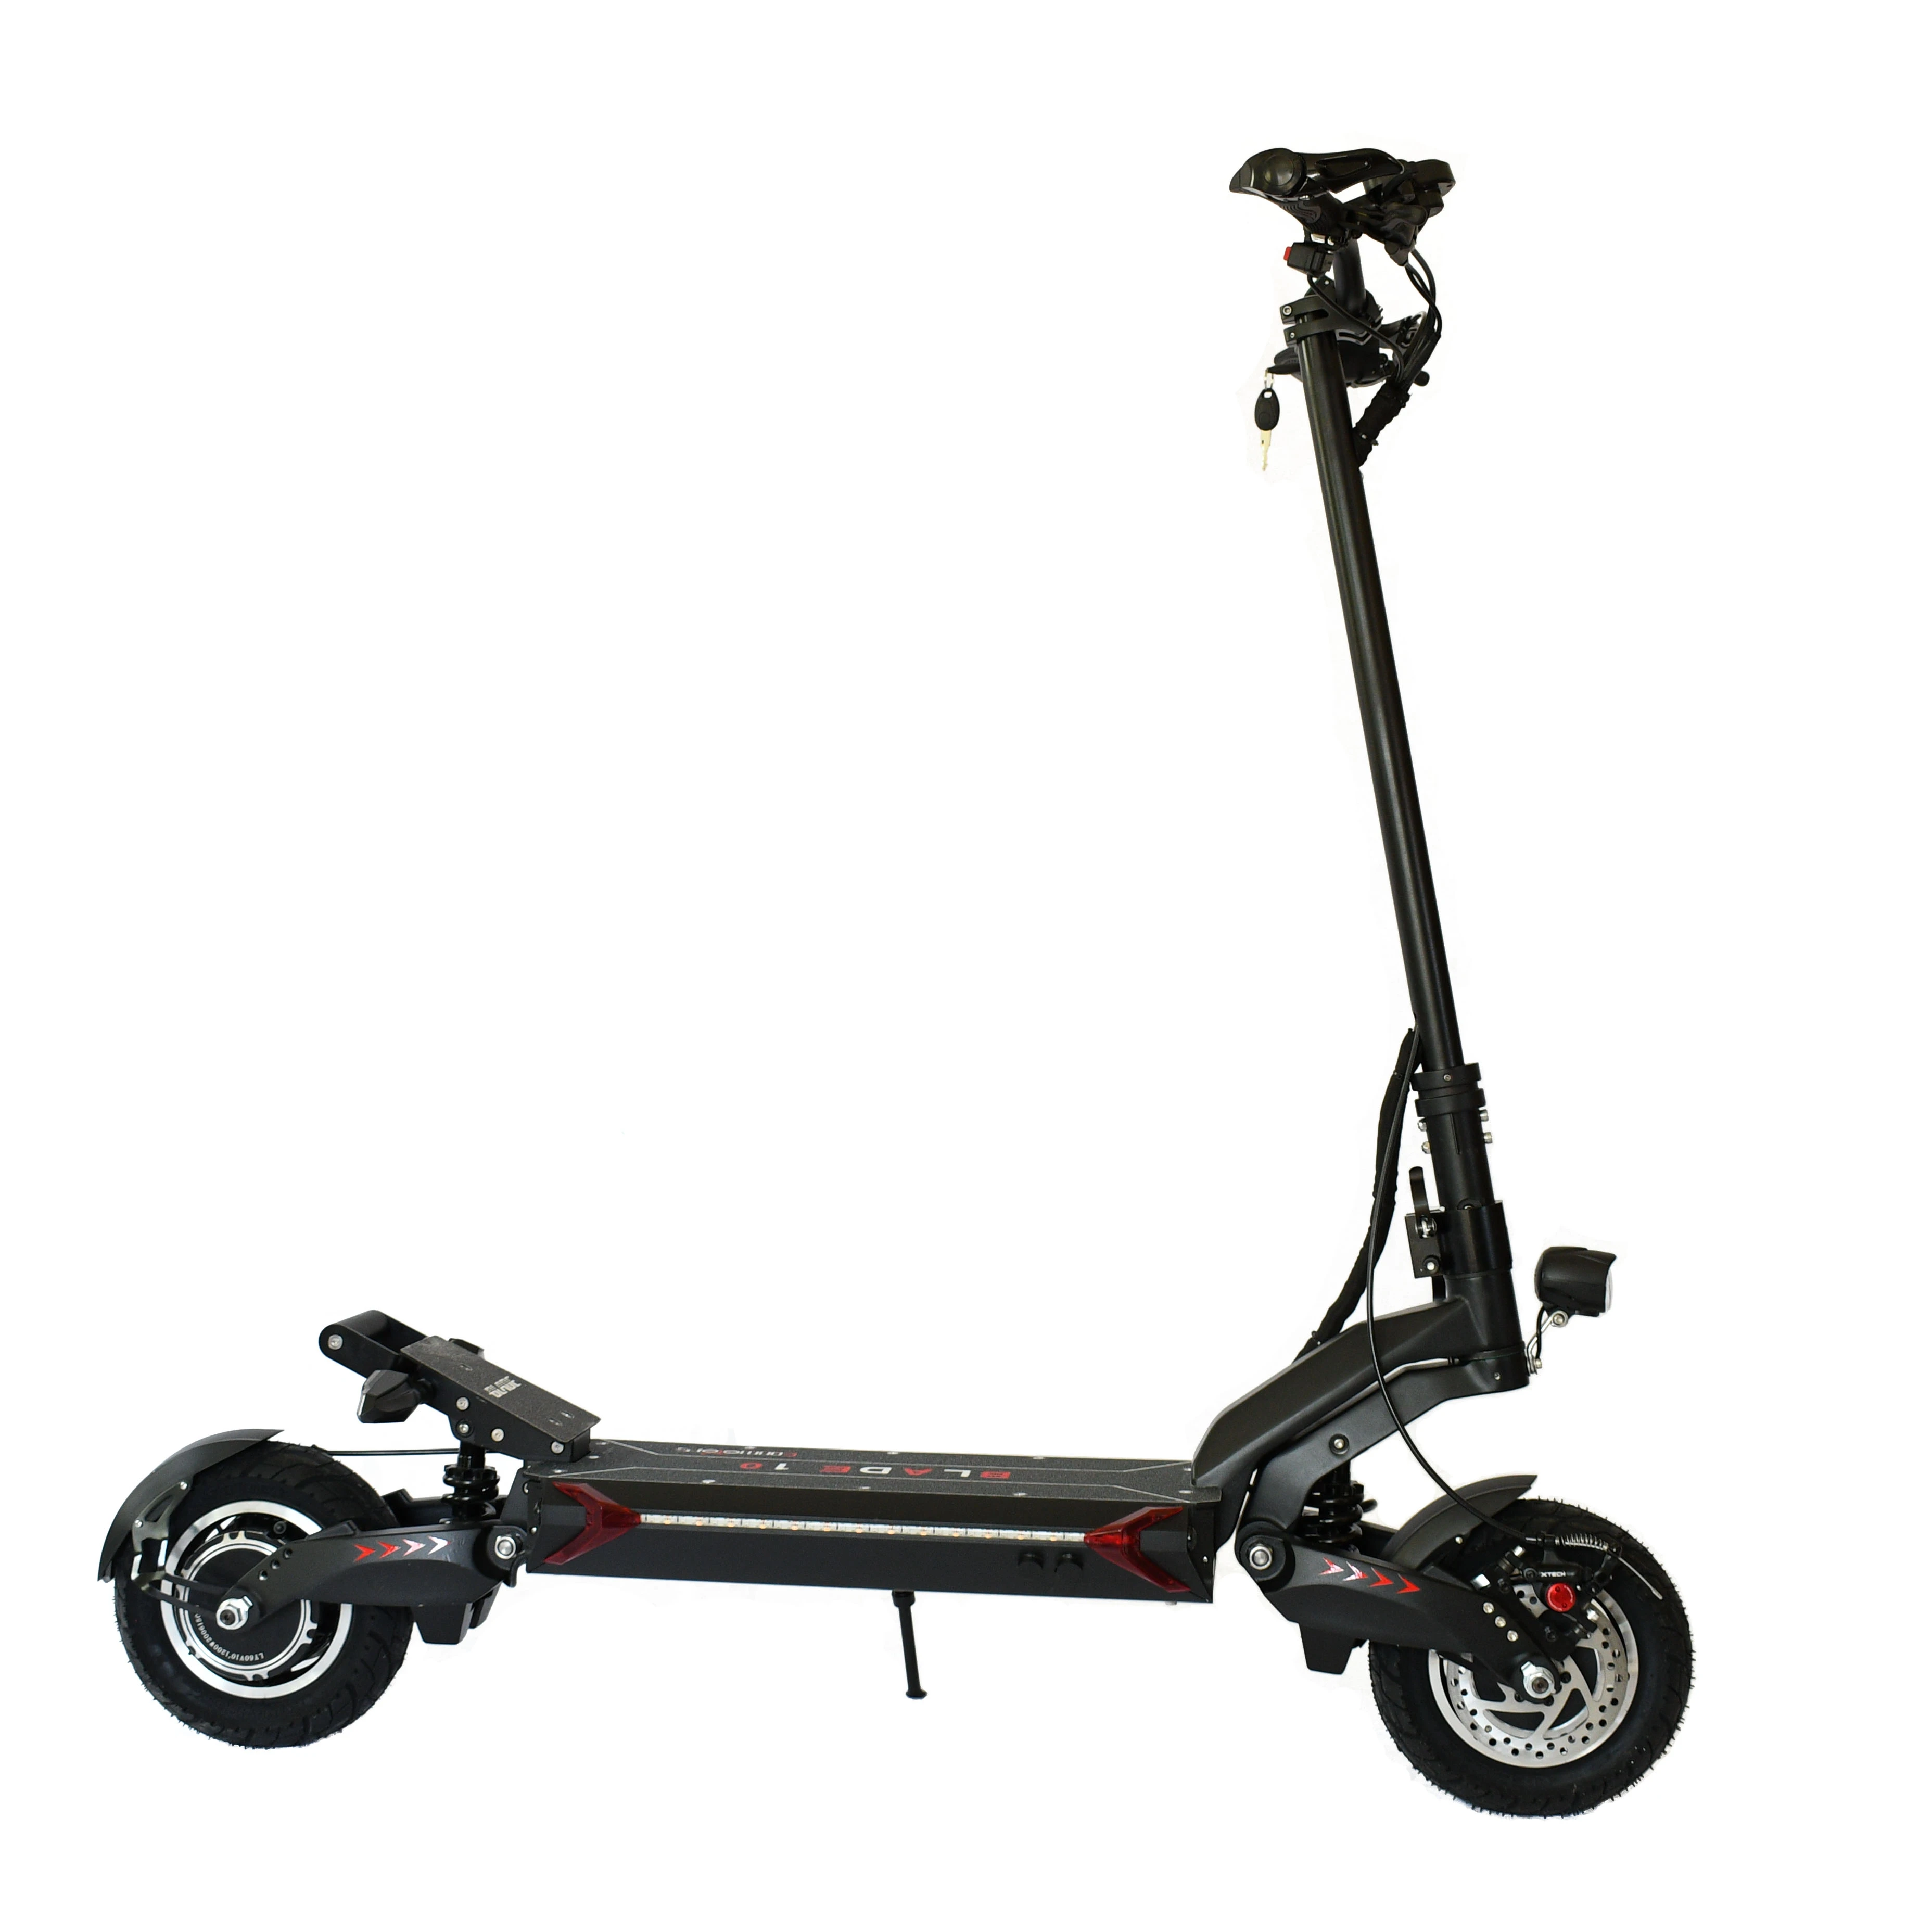 

2400w powerful off road Adult electric scooter Blade 10 dual motor e scooter better than ZERO 10X mantis pro, Black